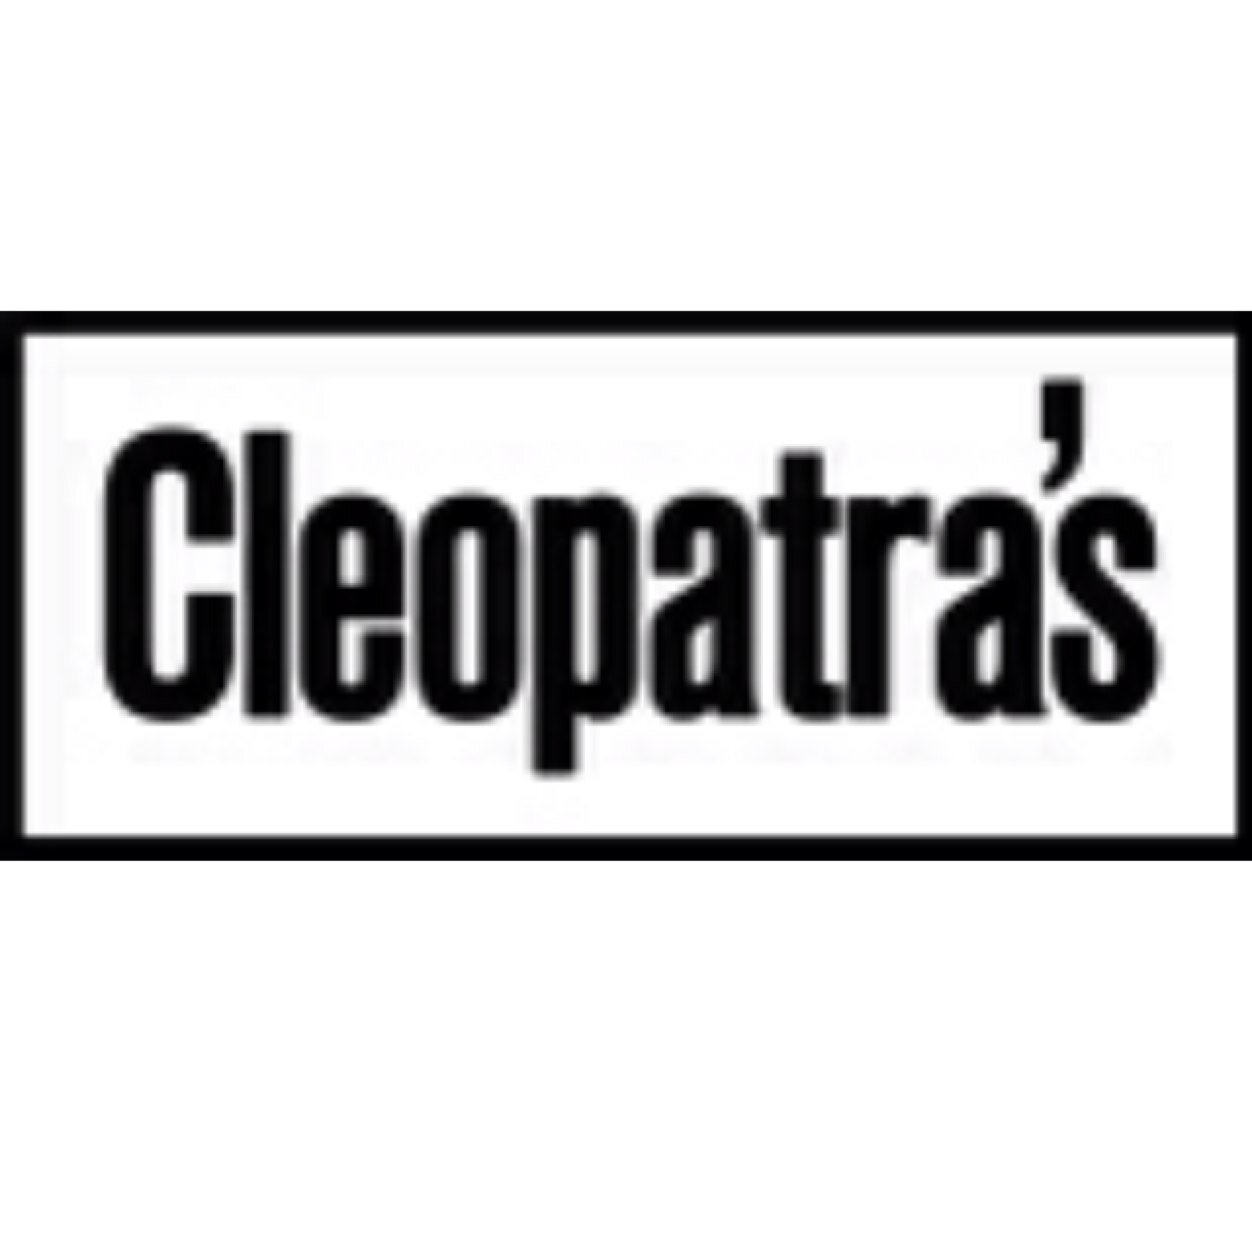 Cleopatra's works collaboratively with artists, curators, writers, & musicians on projects that further connections between artists, institutions, & galleries.